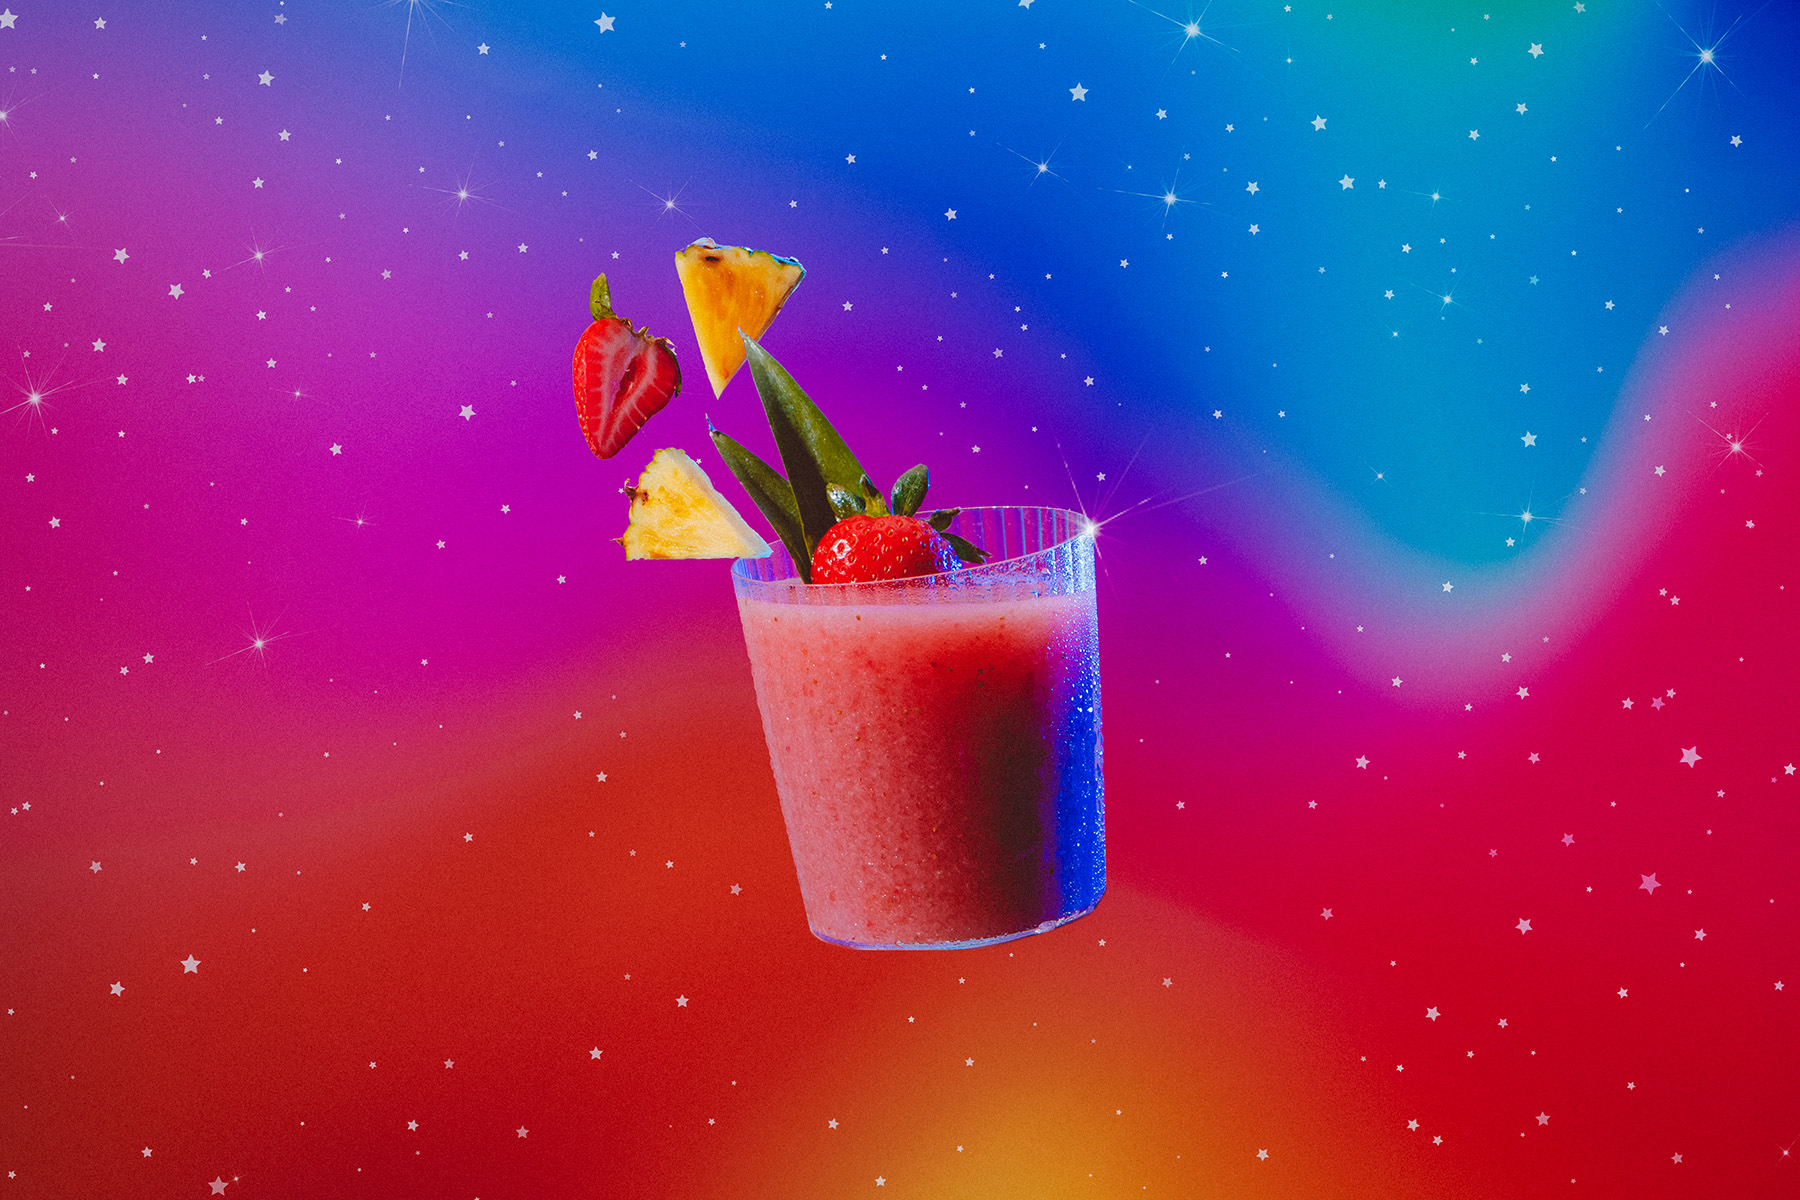 Capricorn inspired rum, lime, strawberries, and coconut cocktail with pineapple and strawberry floating garnish in cosmic atmosphere